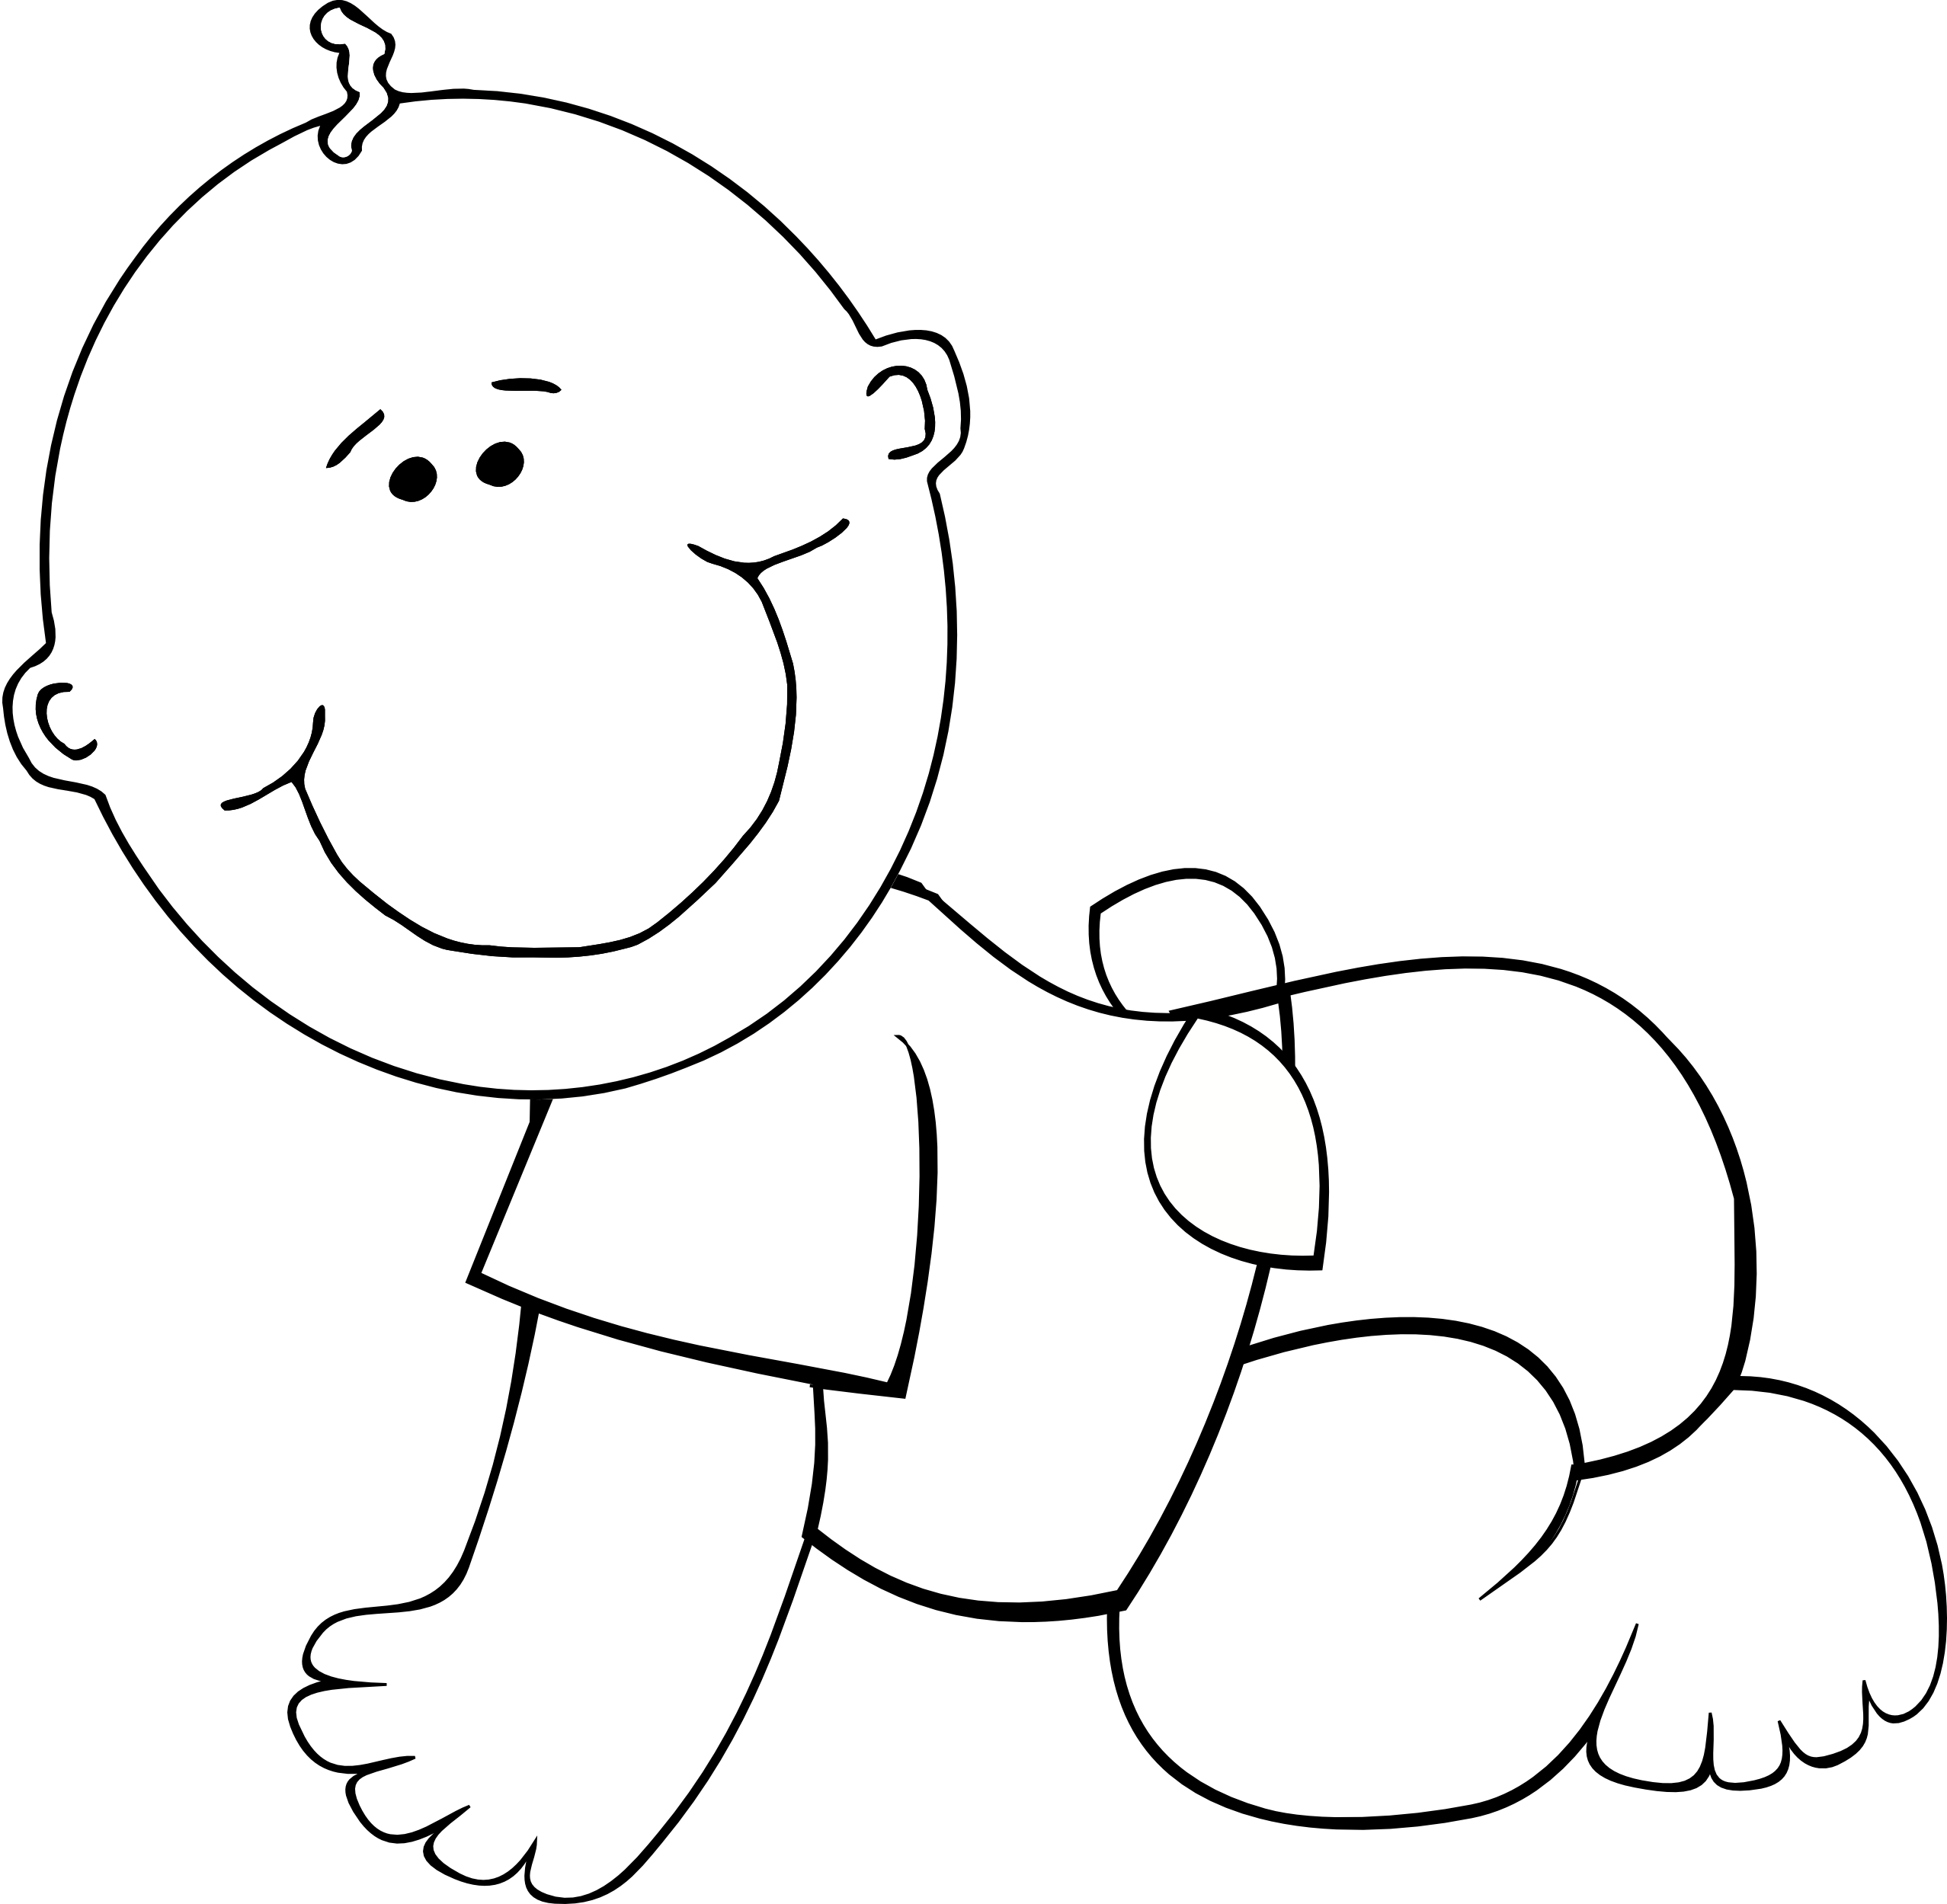 Baby Boy Crawling Black White Line Art Coloring Book Colouring ...